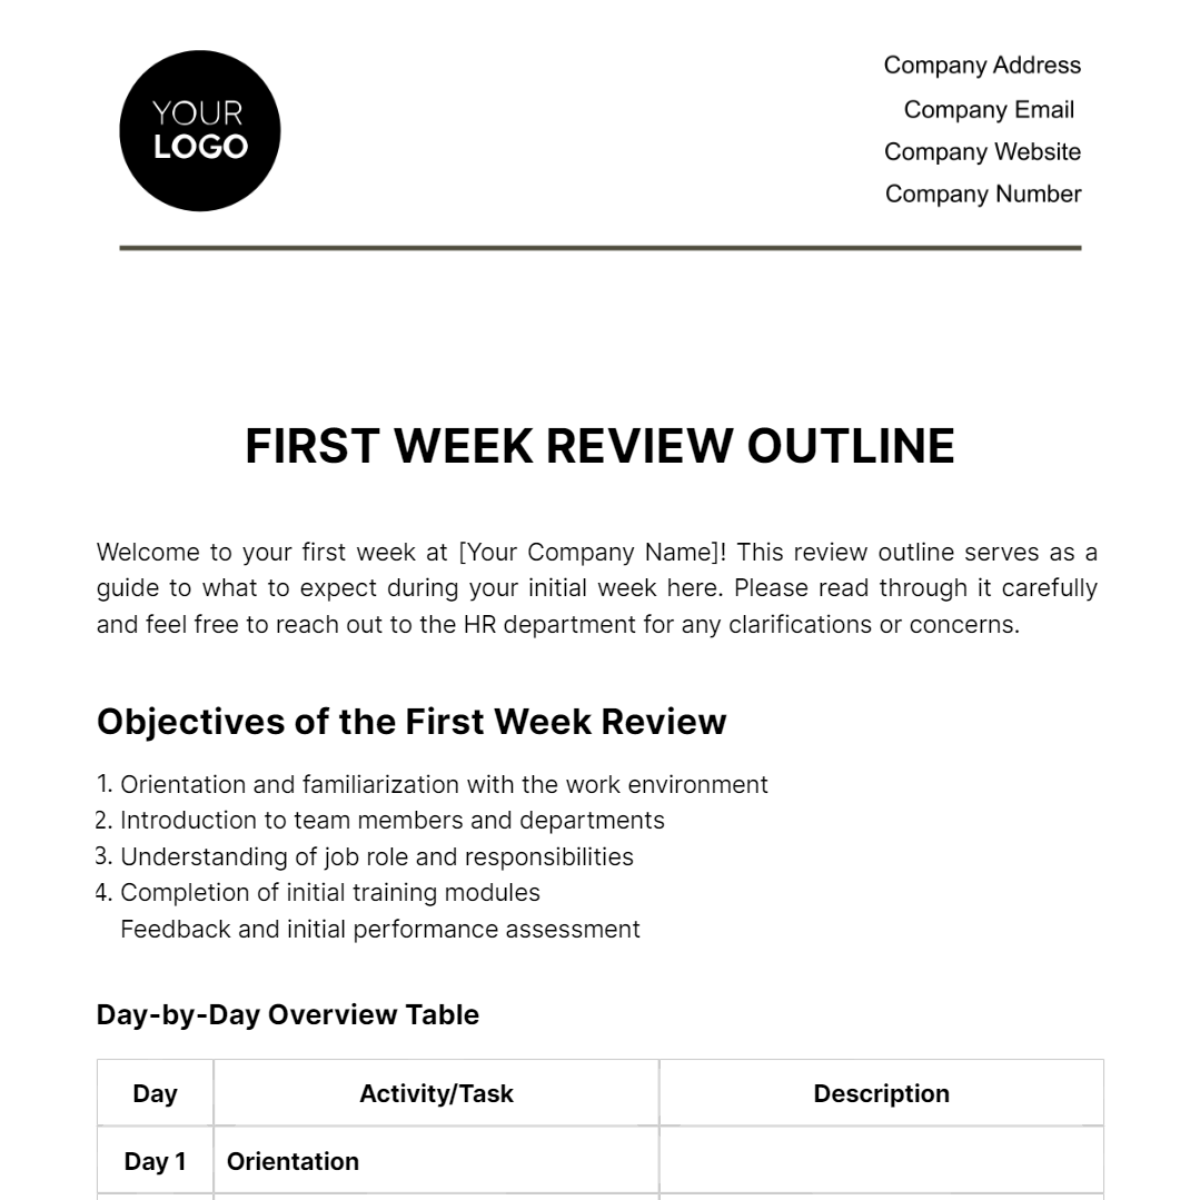 First Week Review Outline HR Template